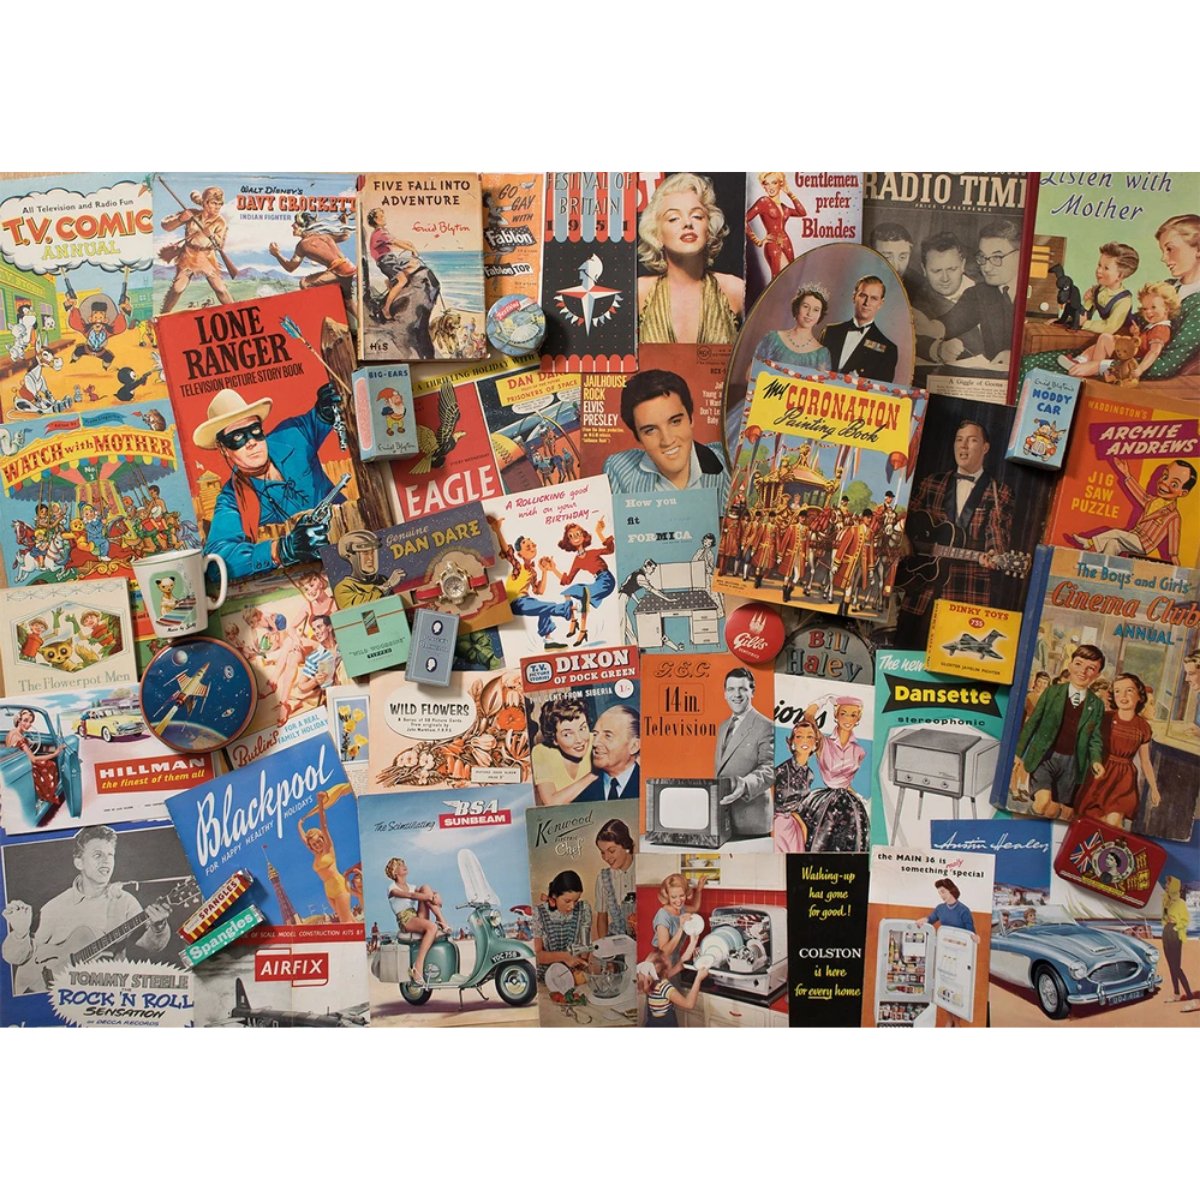 Gibsons Spirit of The 50s Jigsaw Puzzle (1000 Pieces) - Phillips Hobbies